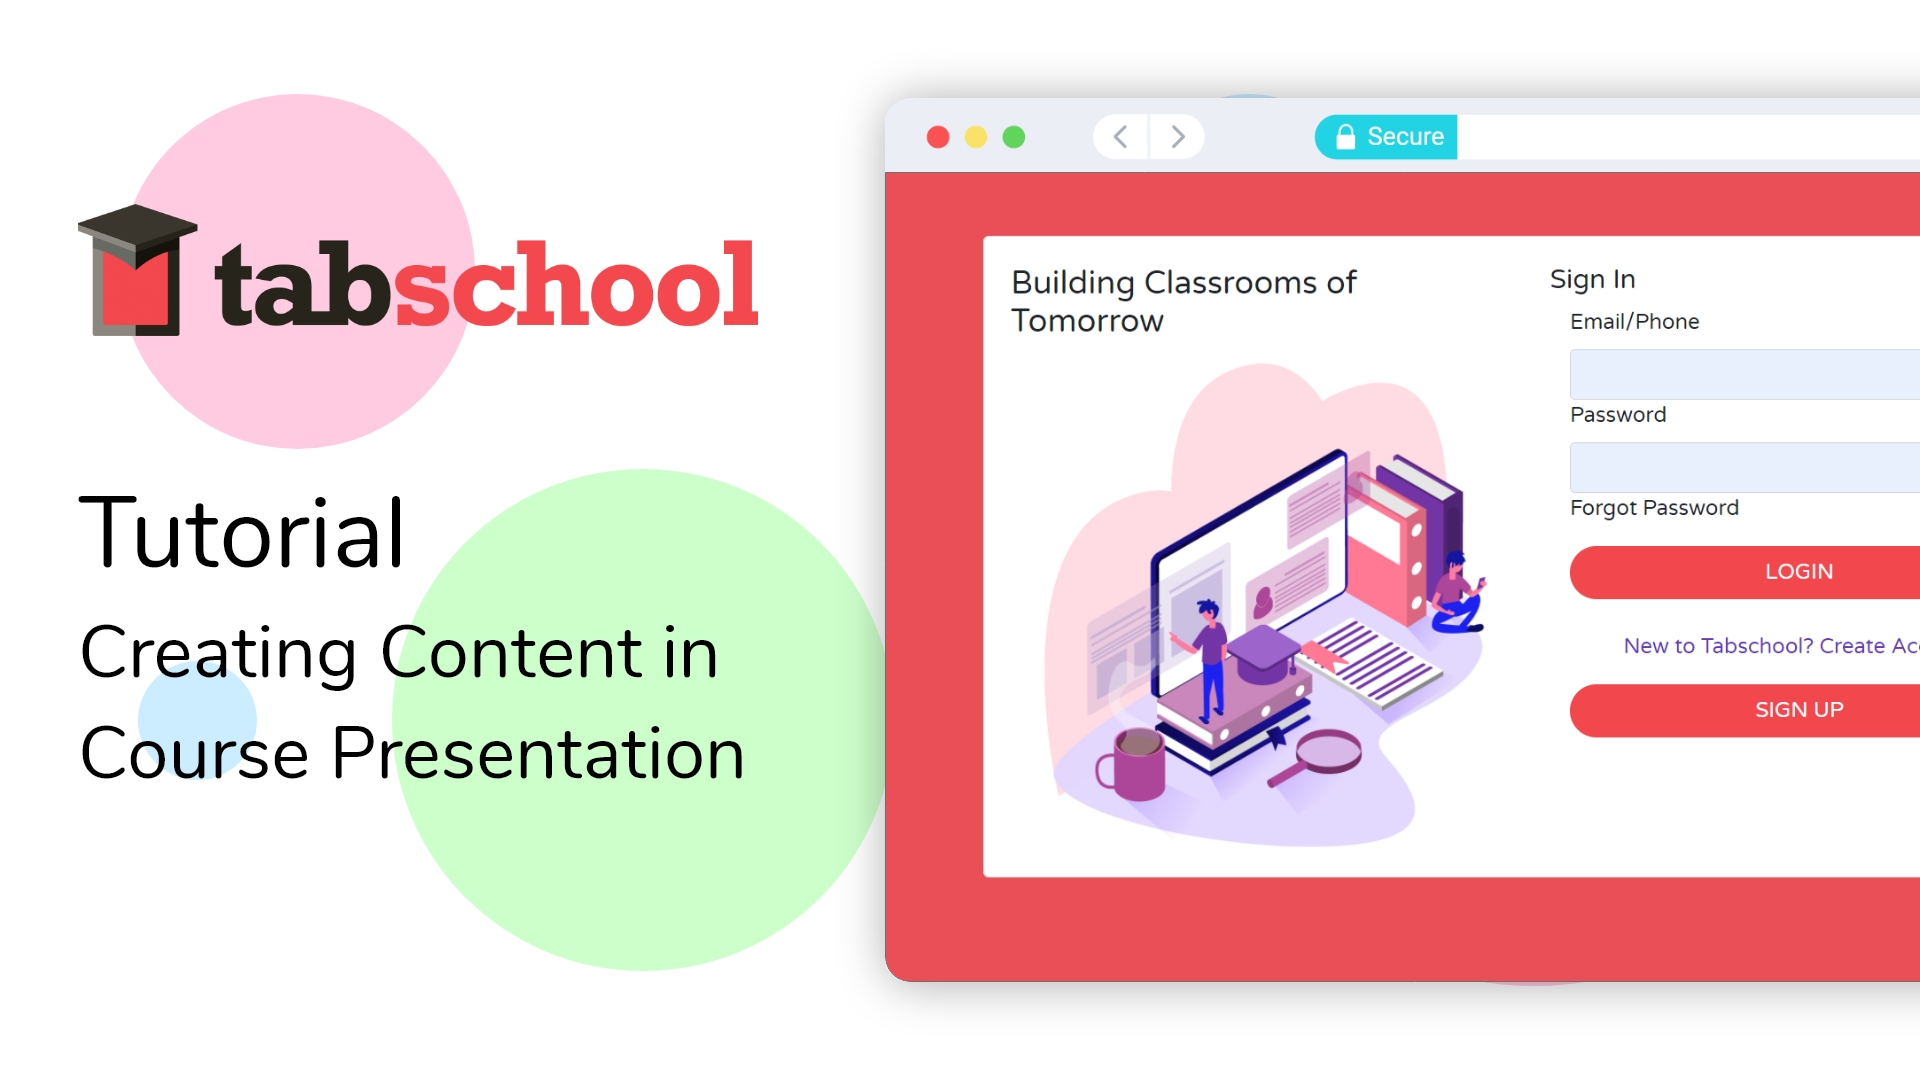 Tutorial – Creating Content on Course Presentation